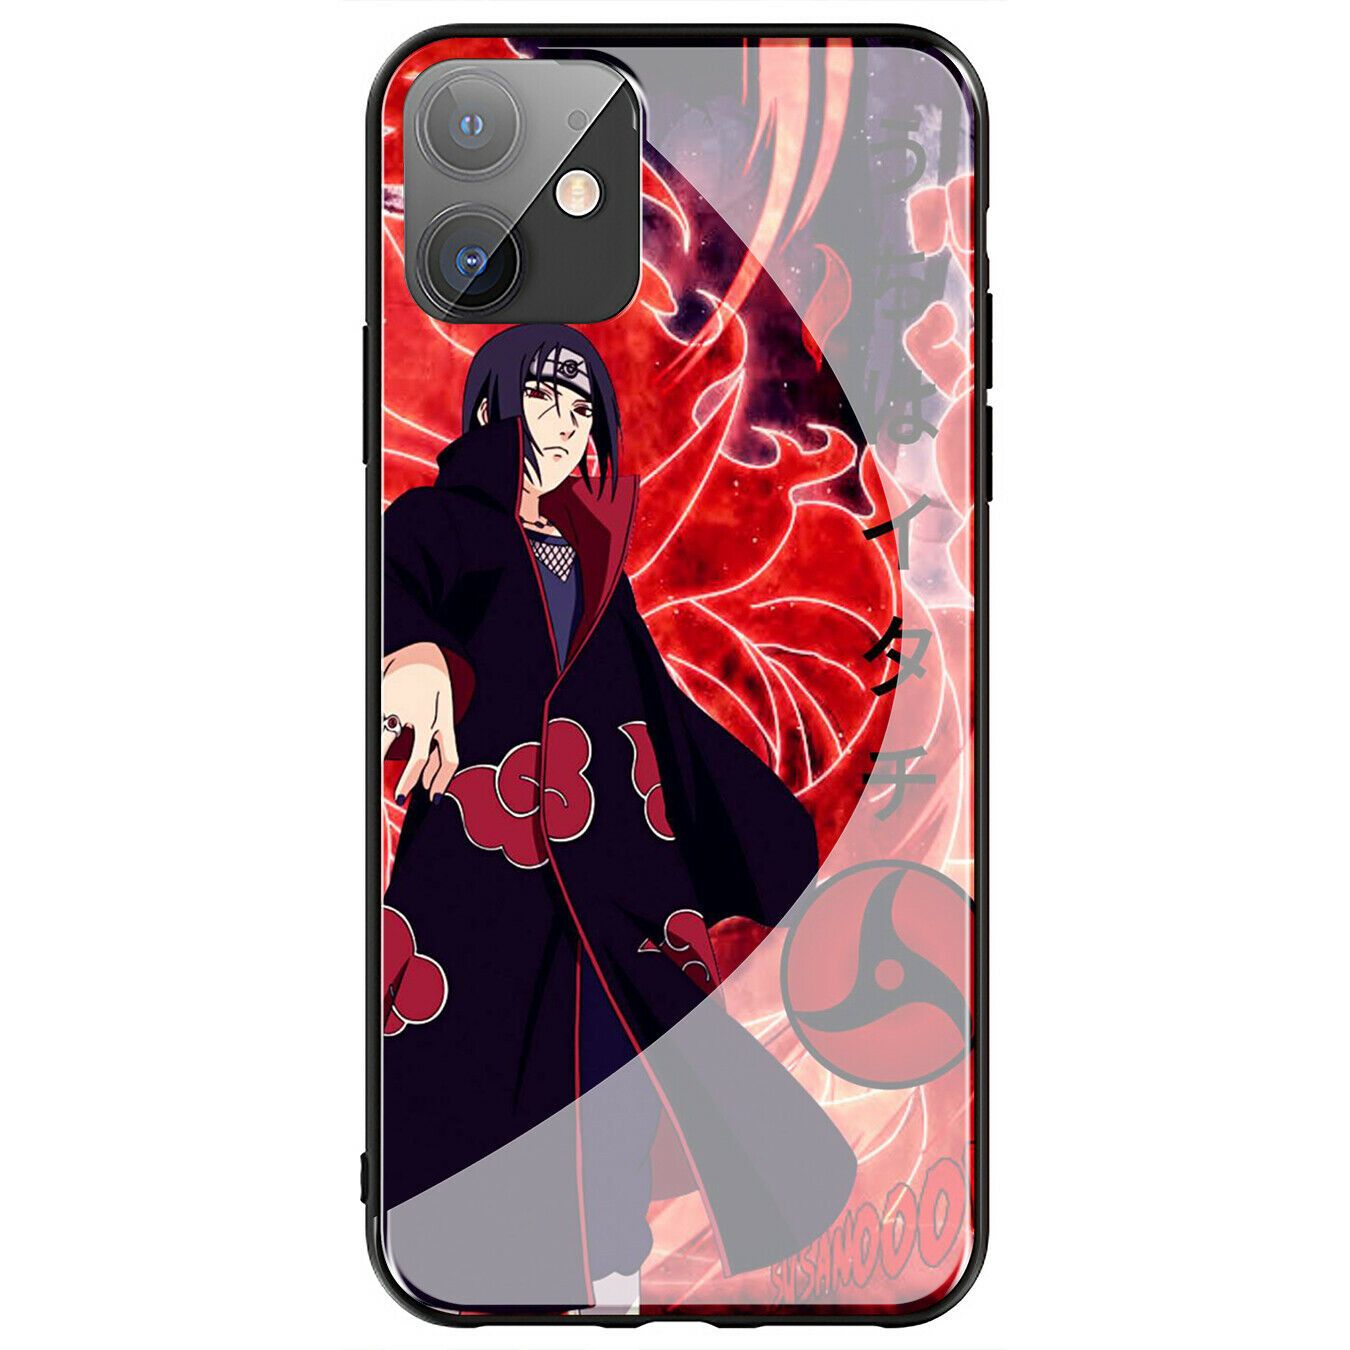 Sasuke NARUTO Akatsuki Glass Case for iPhone 11 Pro XR X XS Max 8 7 6 6s Plus + iPhone Cases AtlasCase 12 for iPhone 6/6S 